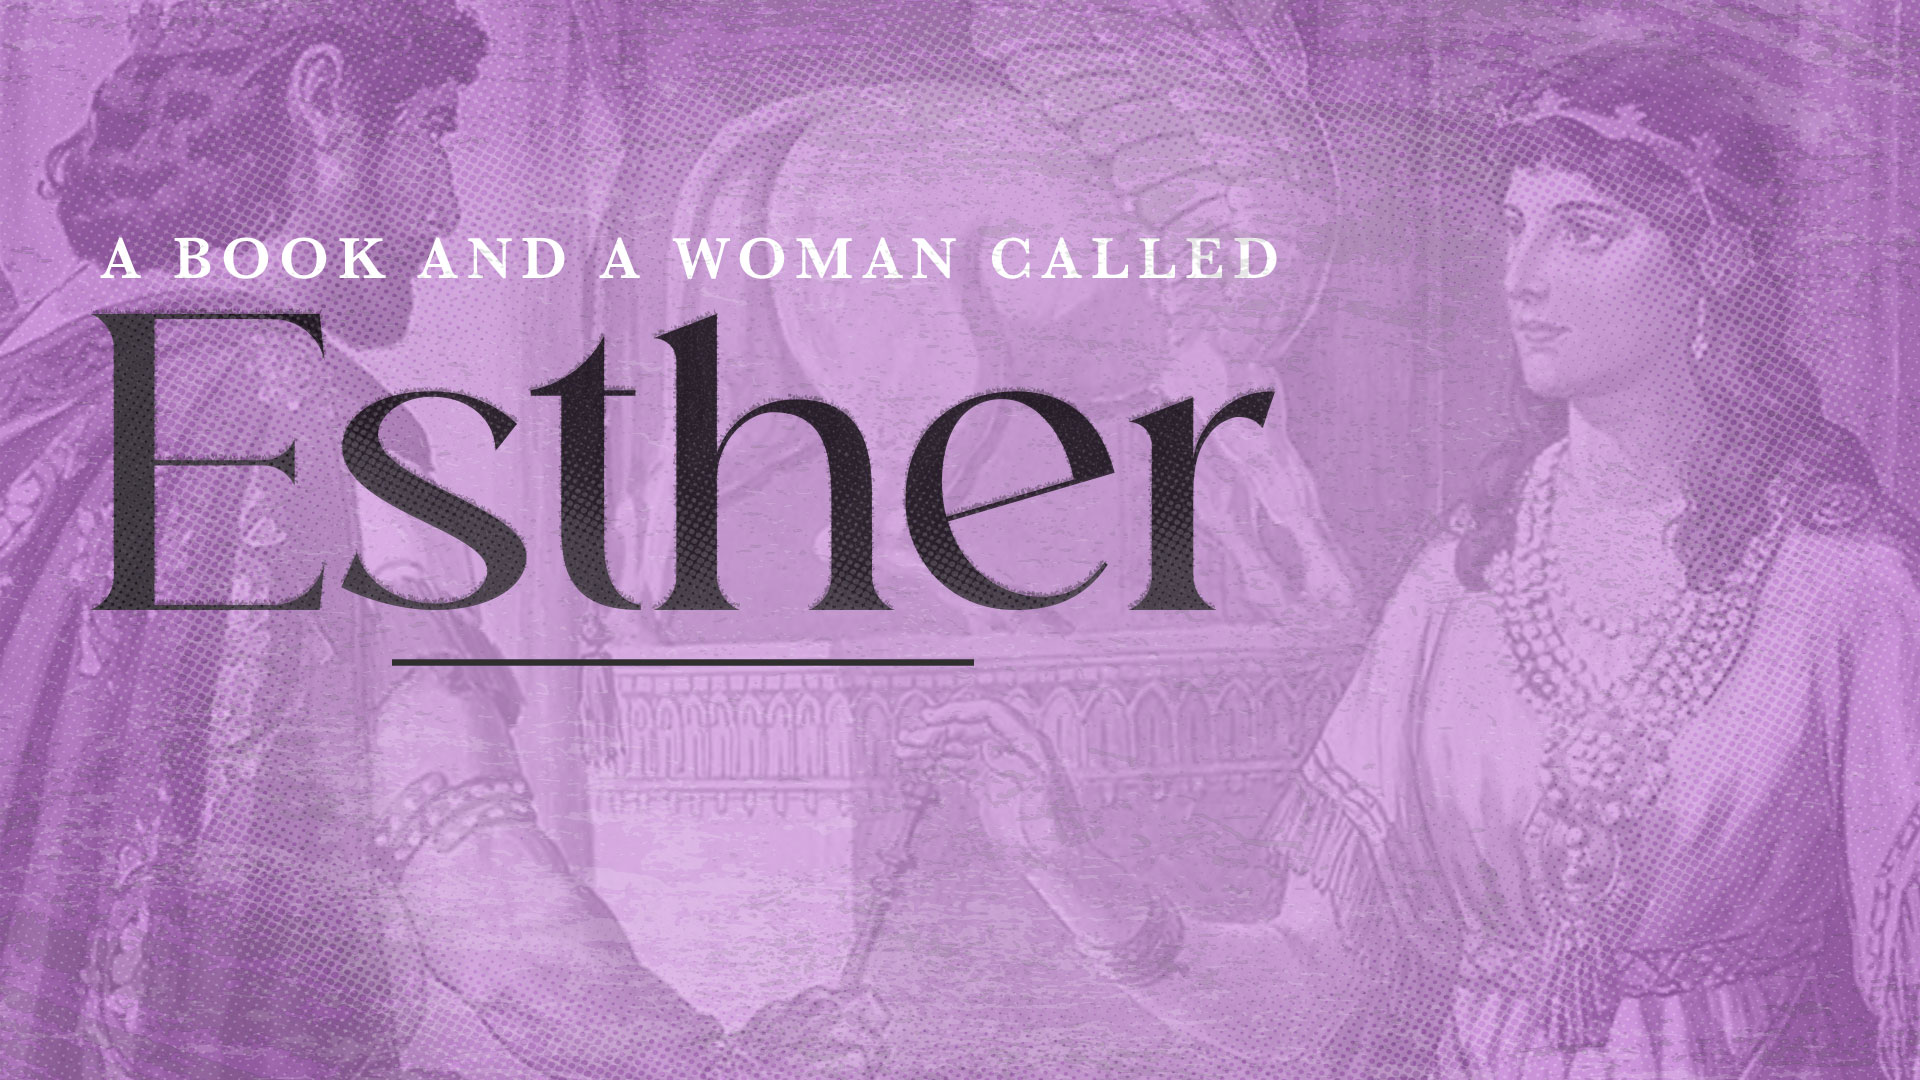 “A book and a woman called Esther